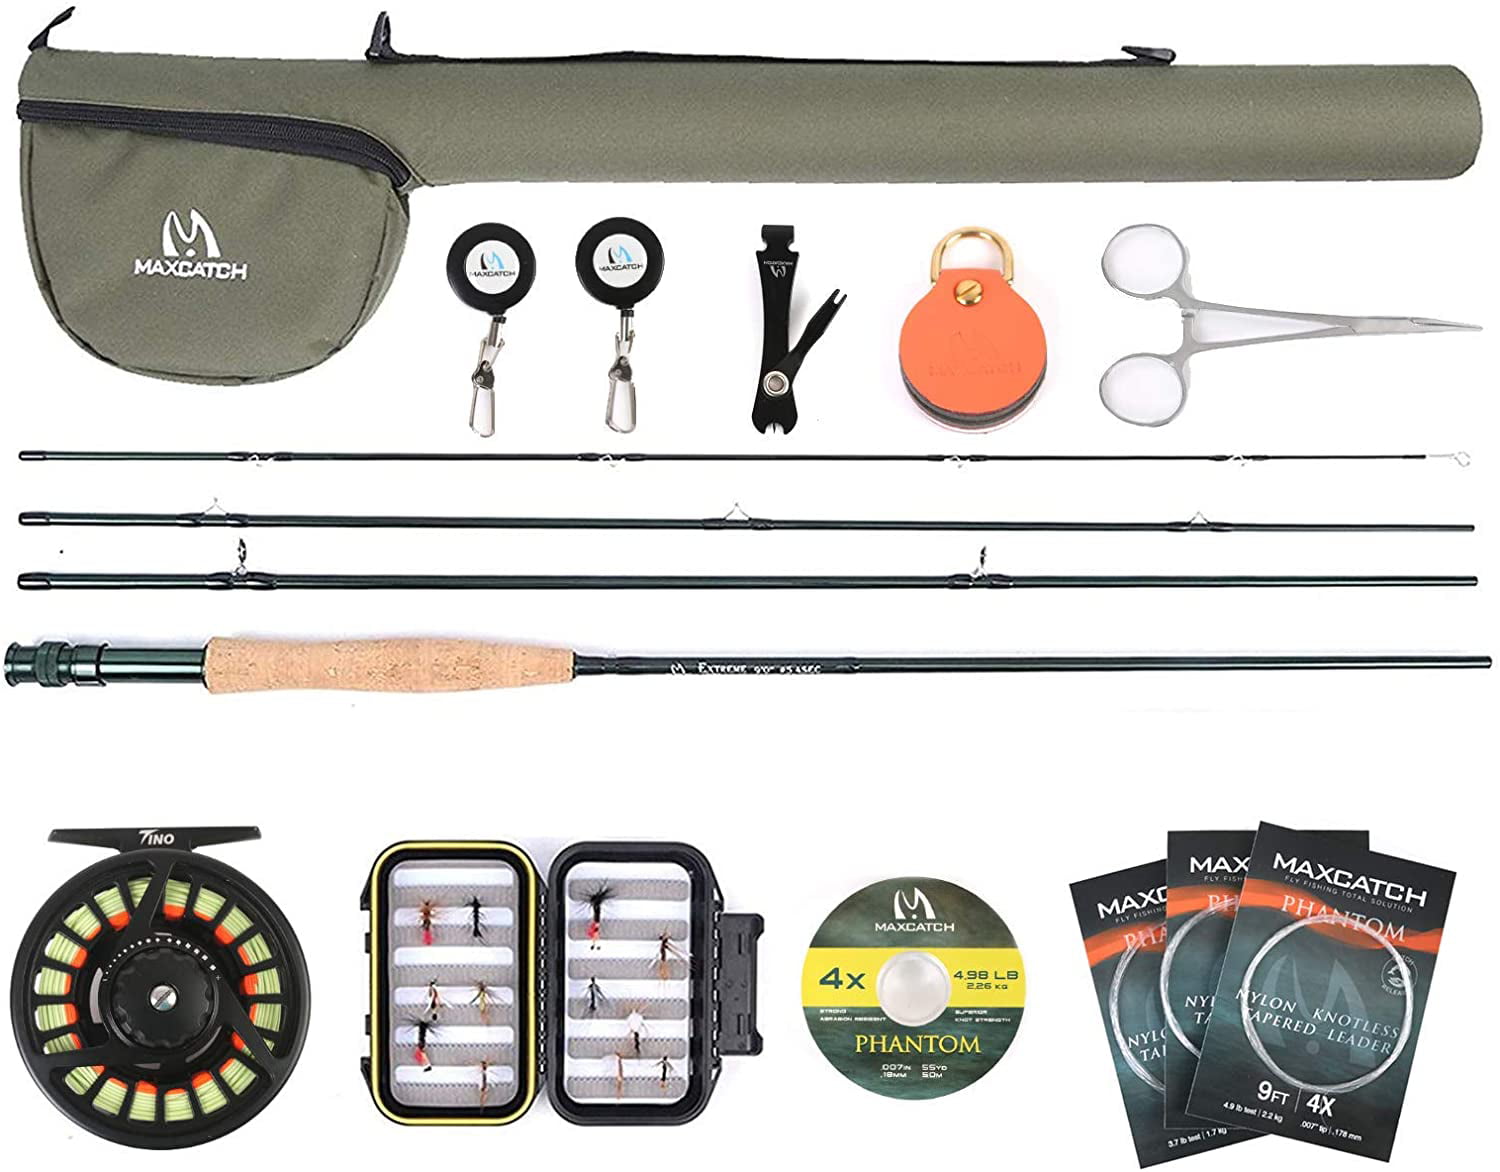 Maxcatch Explorer Fly Rod Graphite 4-Piece Fly Fishing Rod 8'4'' 3weight 